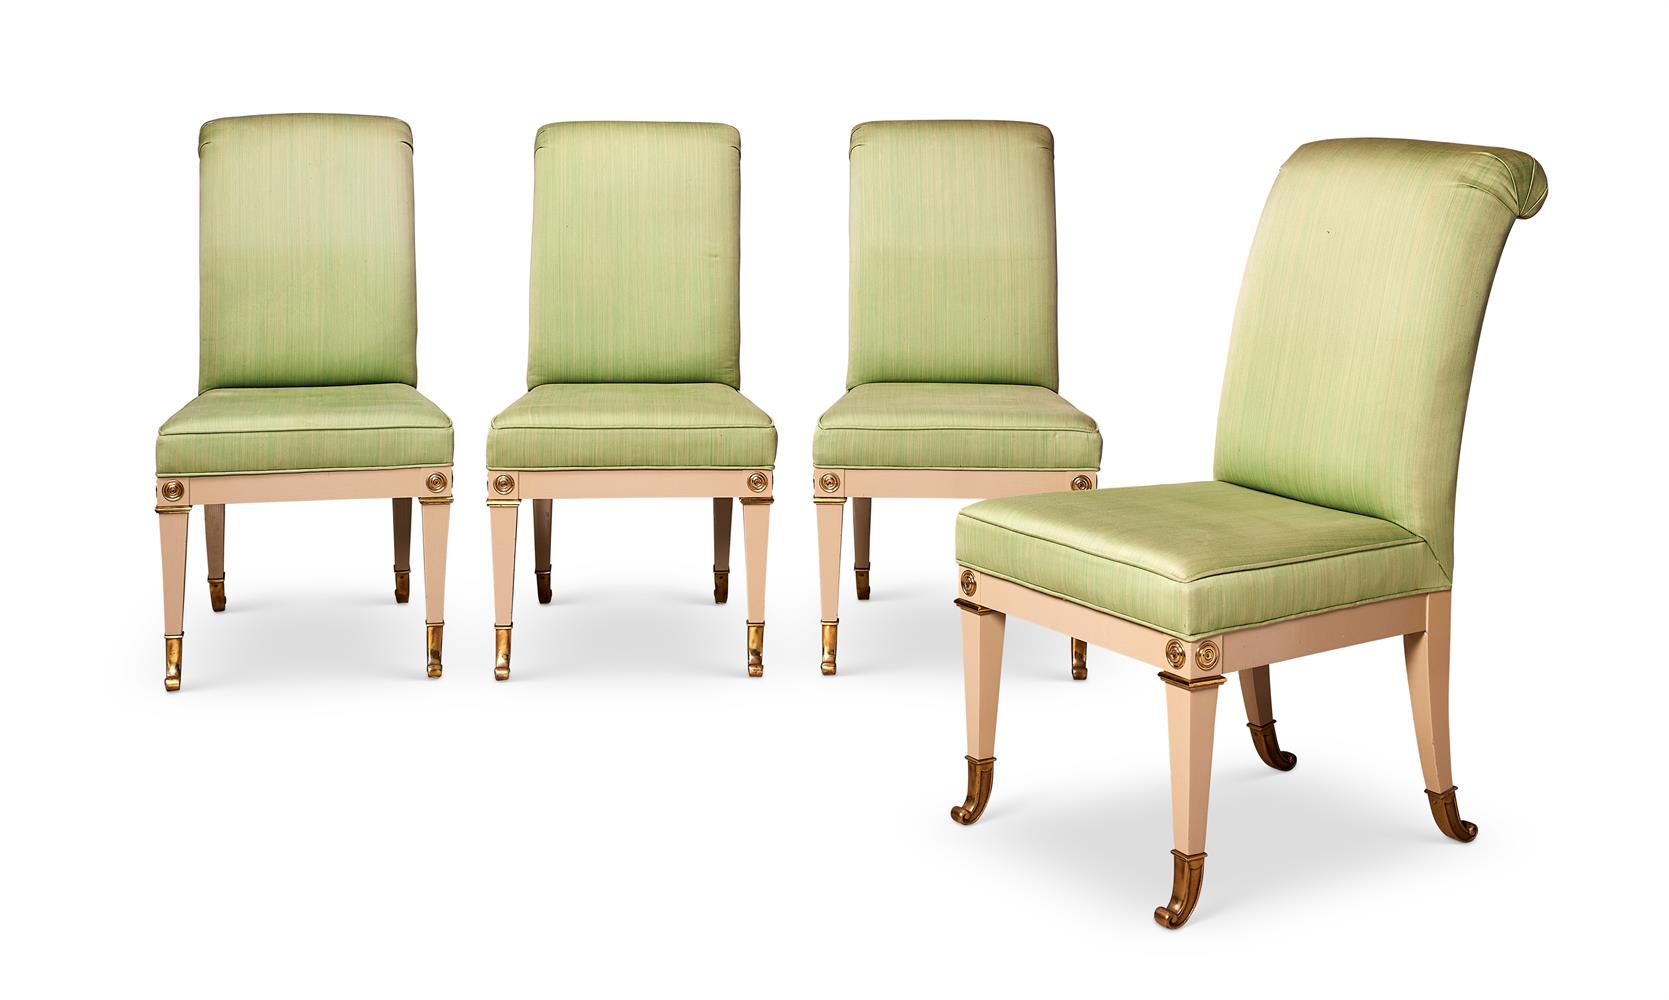 A SET OF FOUR CREAM LACQUERED AND GILT BRASS MOUNTED DINING CHAIRS IN THE EMPIRE STYLE, CIRCA 1975